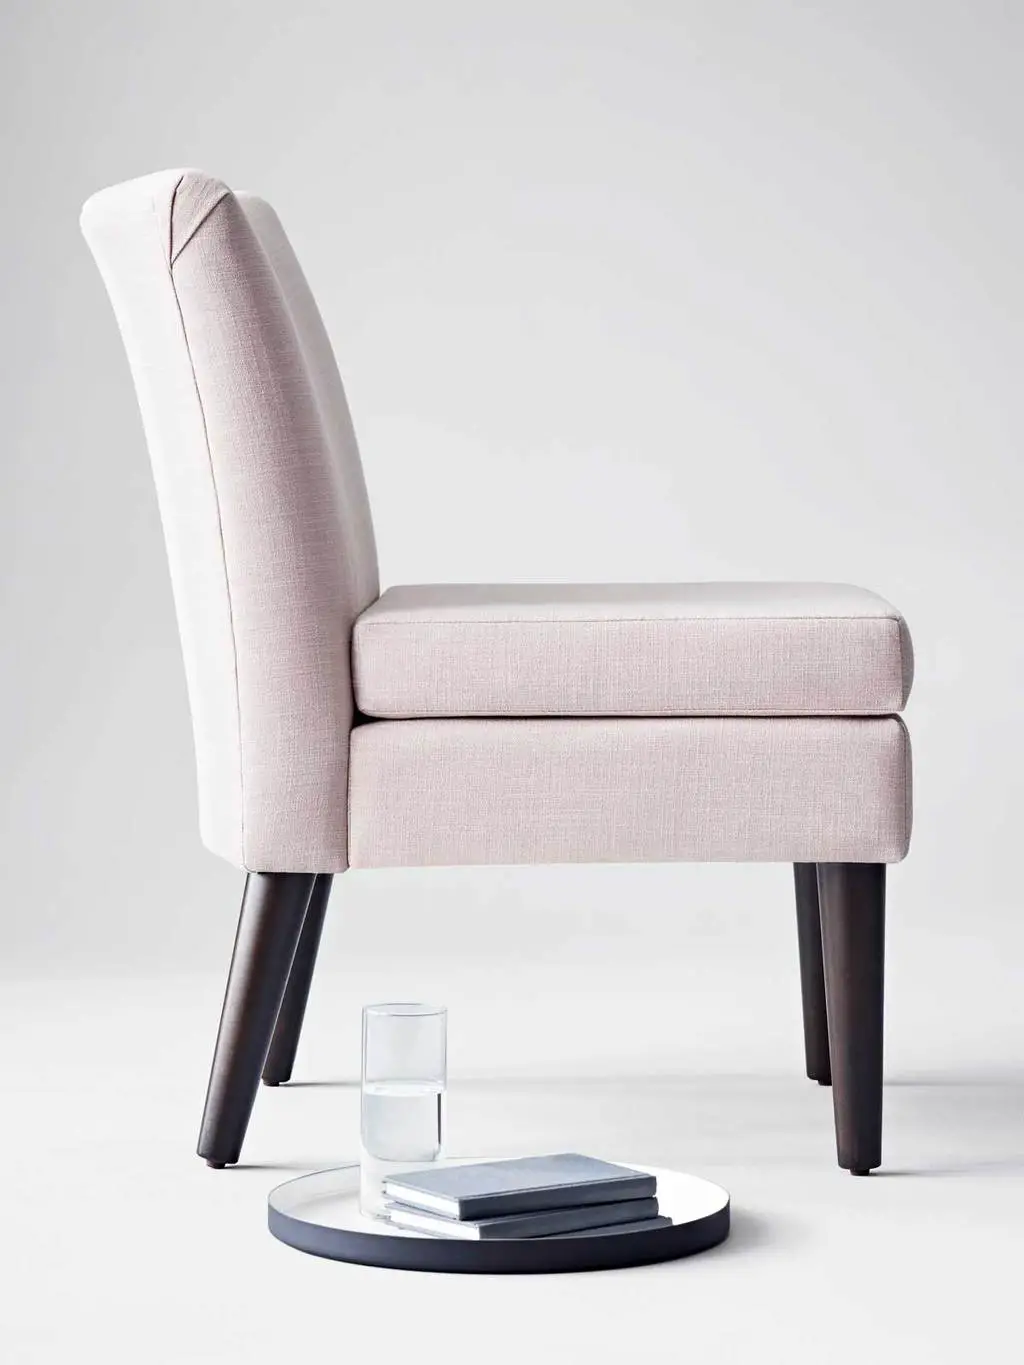 Blush slipper chair from Project 62 on Thou Swell @thouswellblog